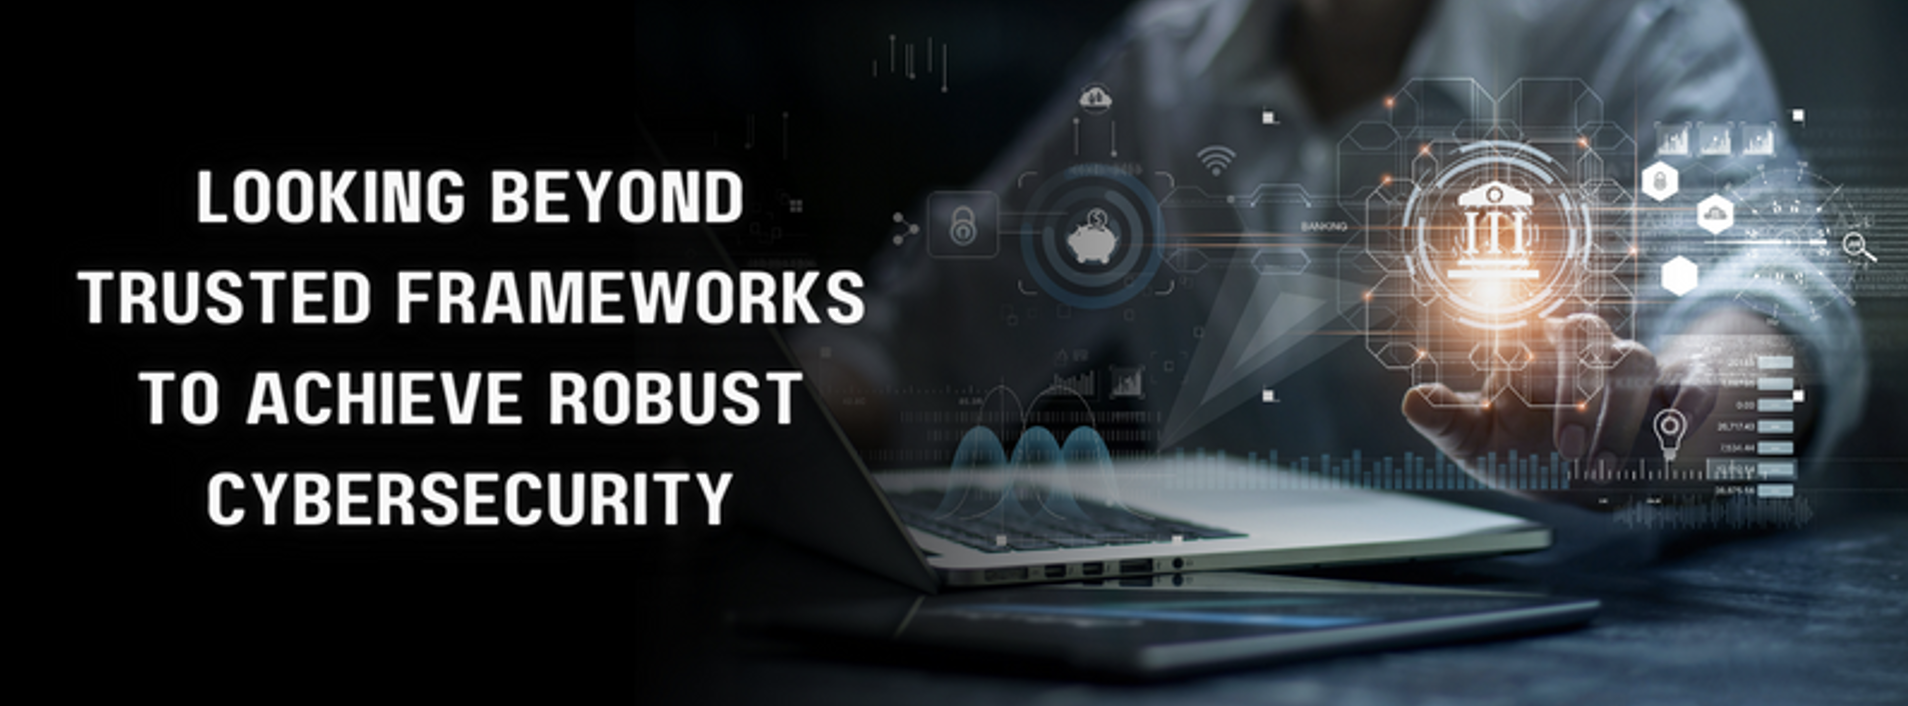 Looking Beyond Trusted Frameworks to Achieve Robust Cybersecurity